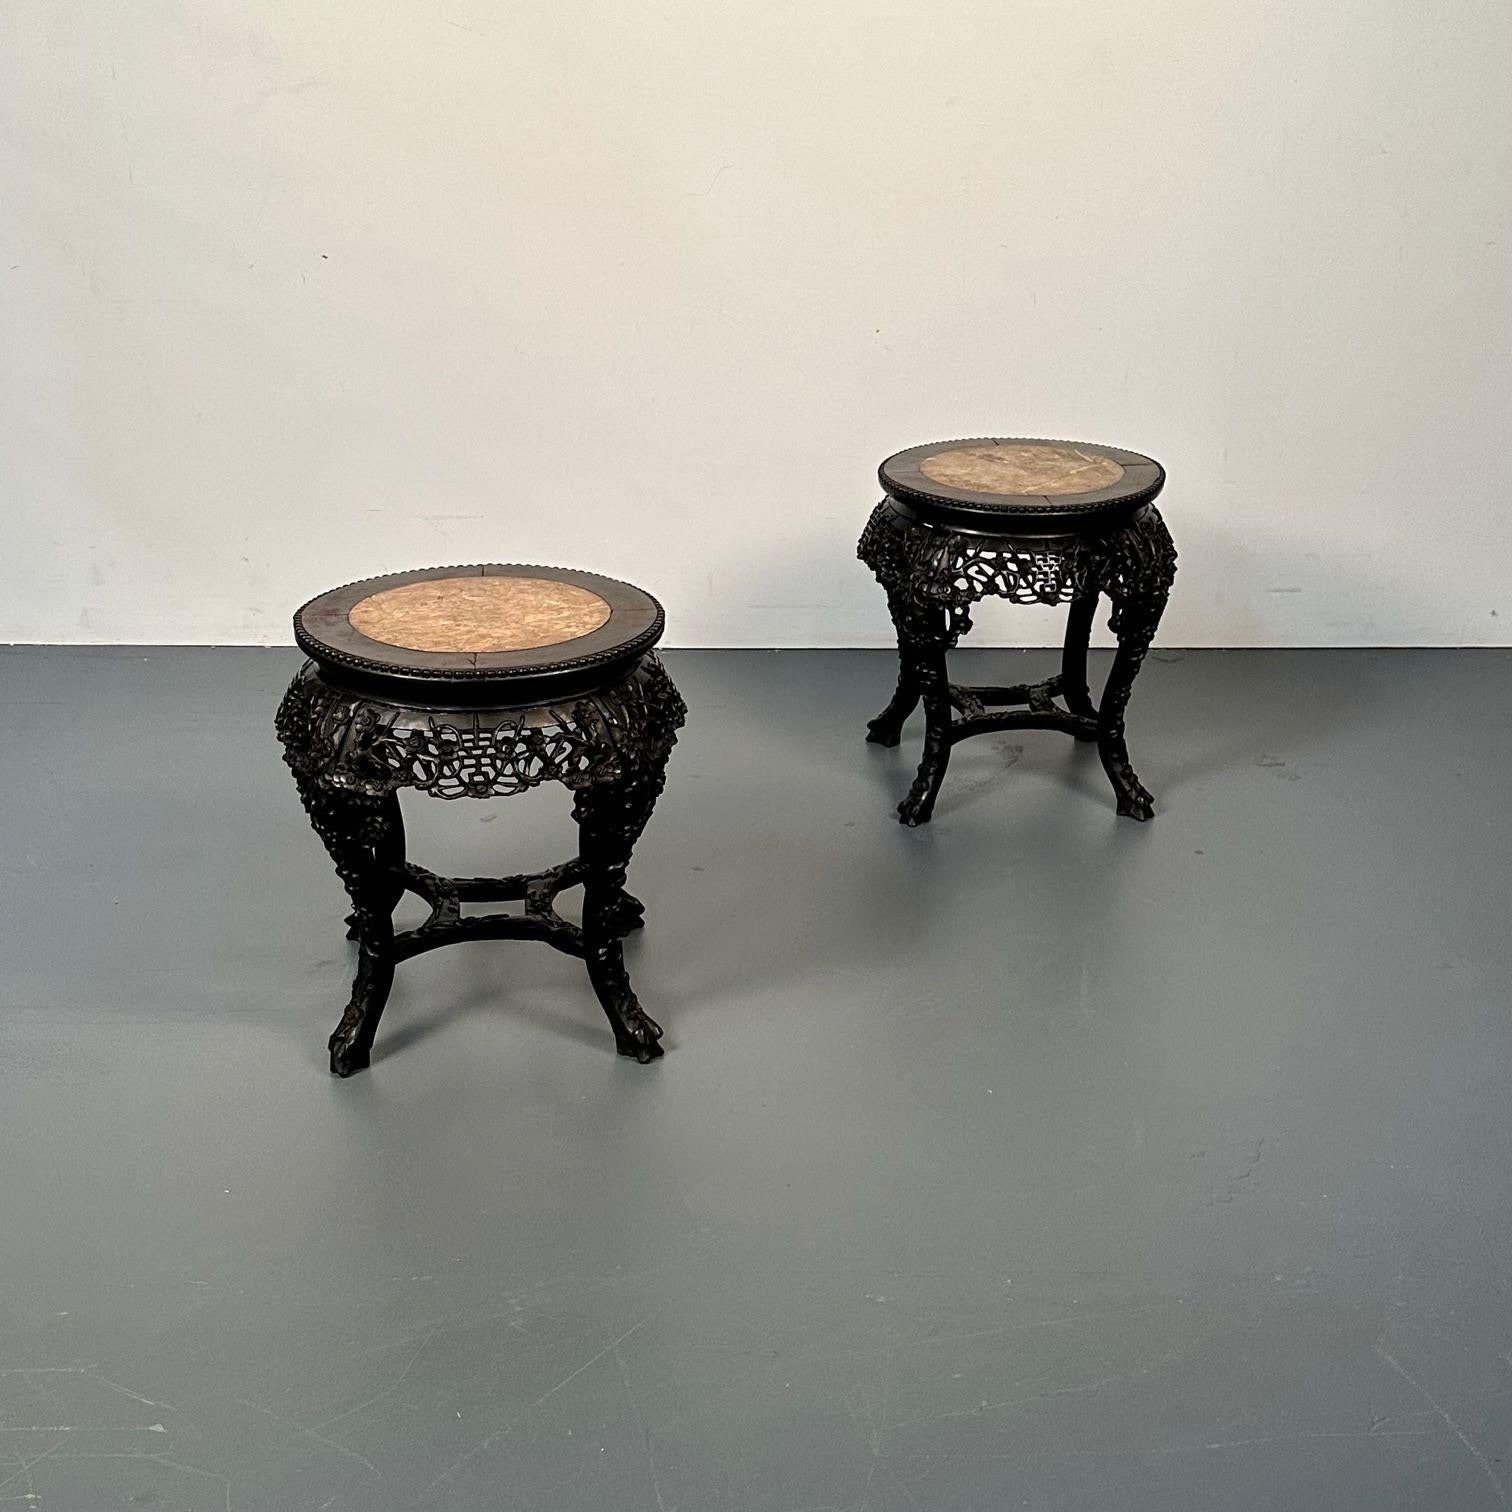 20th Century Pair of Hand Carved Oriental Chinese Pedestals / Low Tables, Teak Wood, Marble